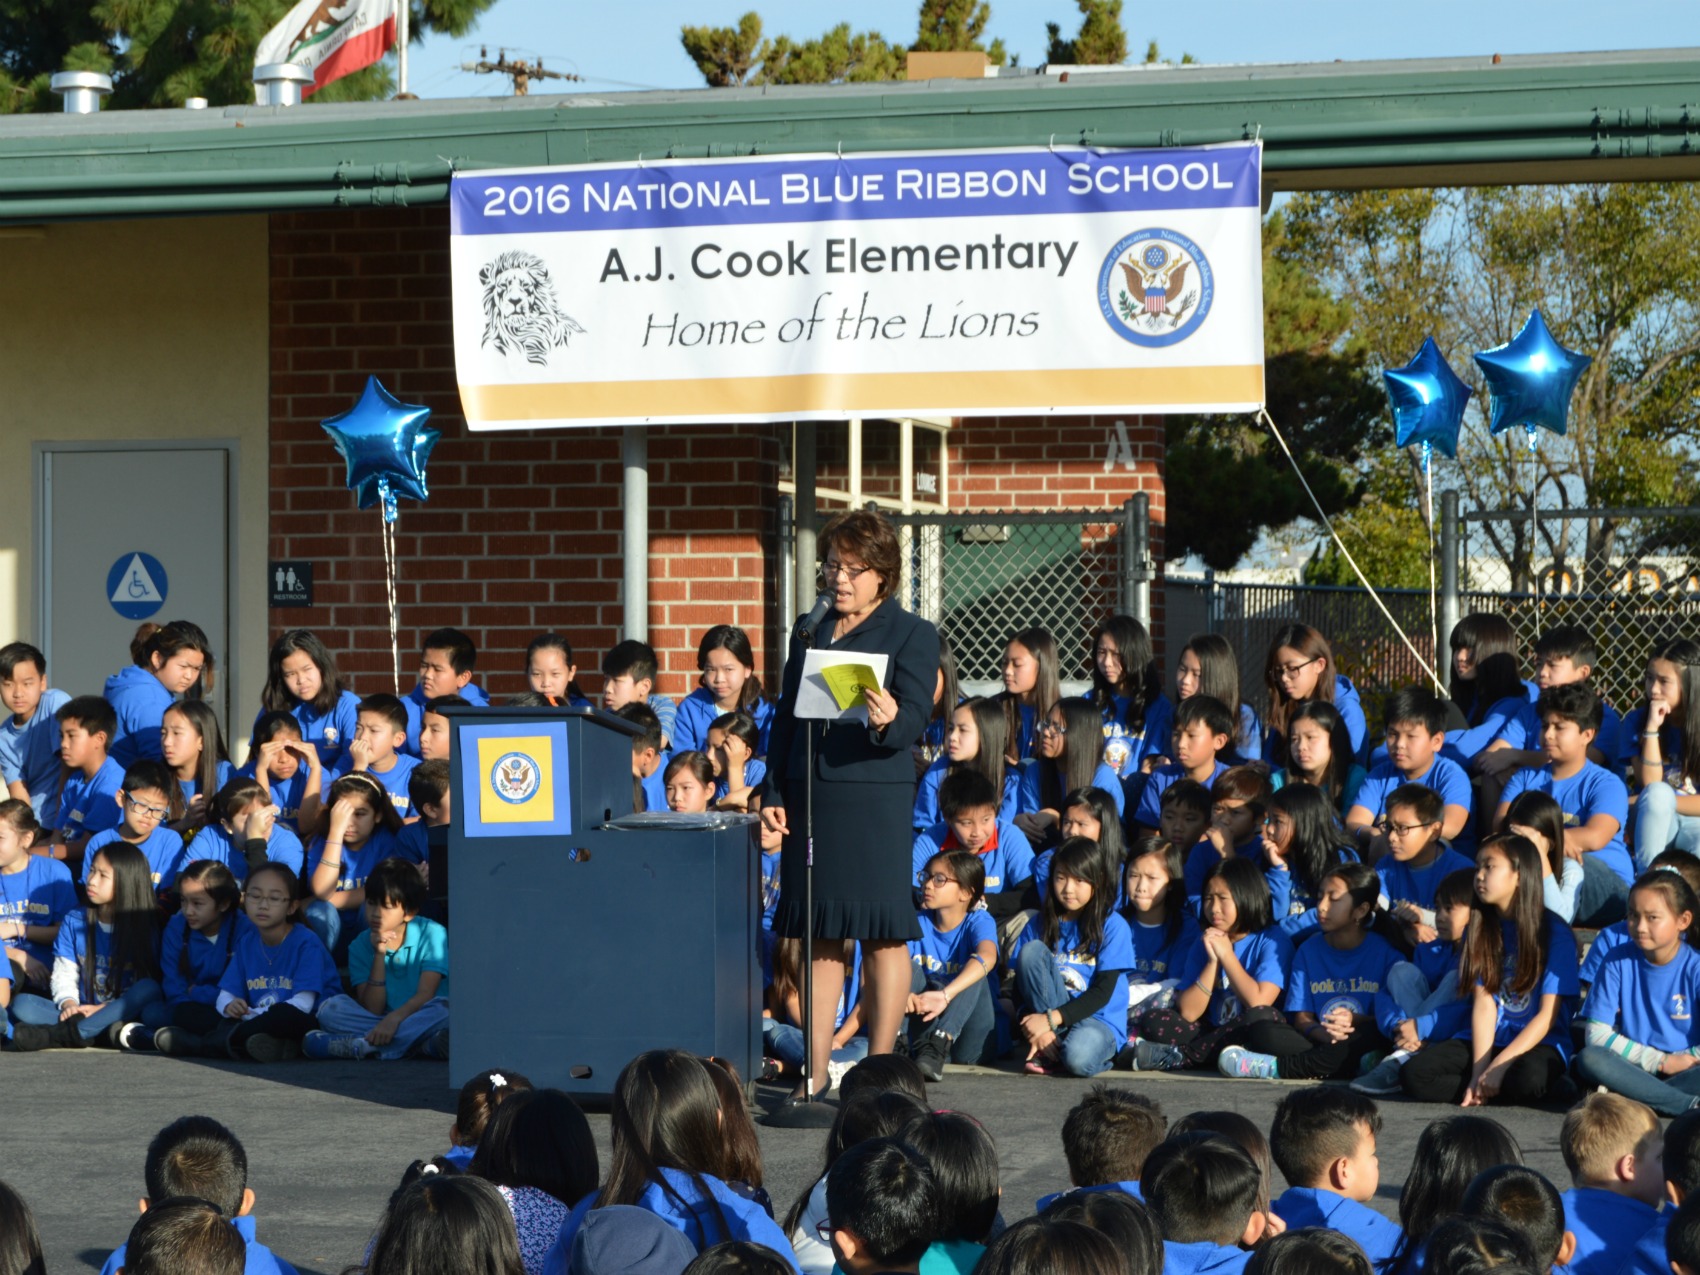 Students from Cook Elementary gathered on the blacktop for a National Blue Ribbon ceremony